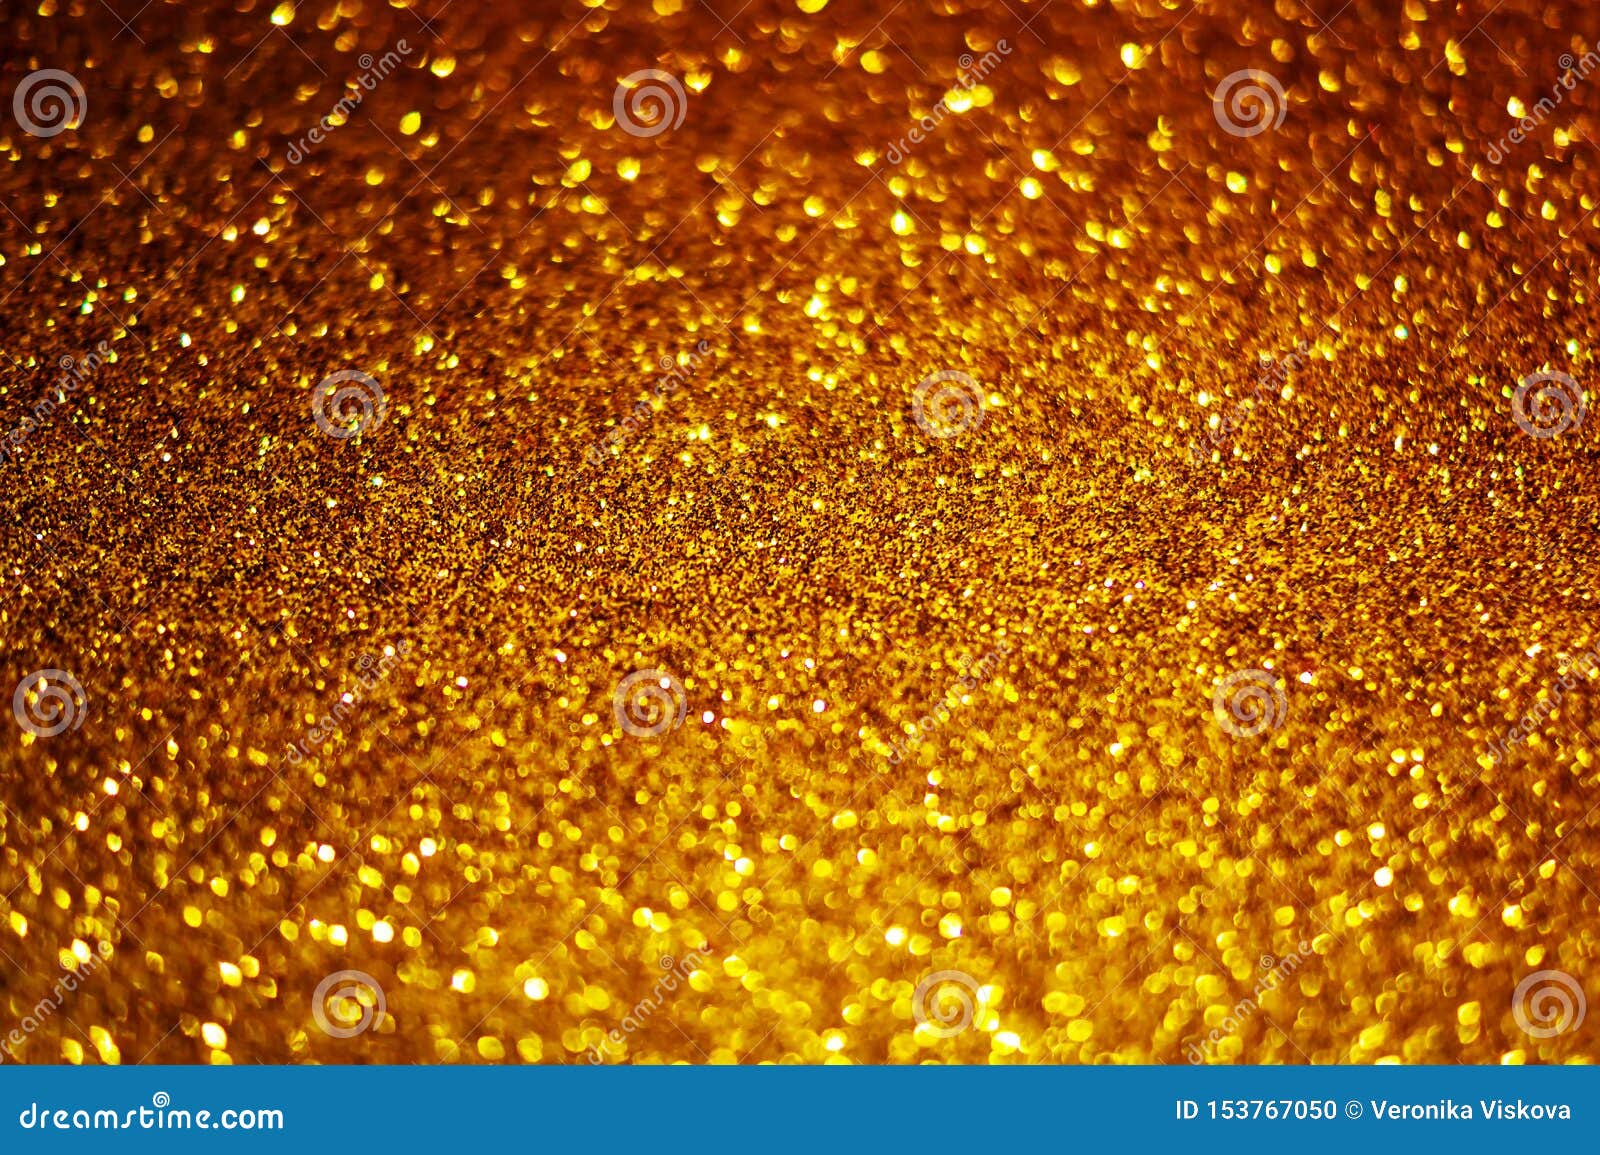 Festive Abstract Gold Glitter Texture Background With Shiny Sparkle